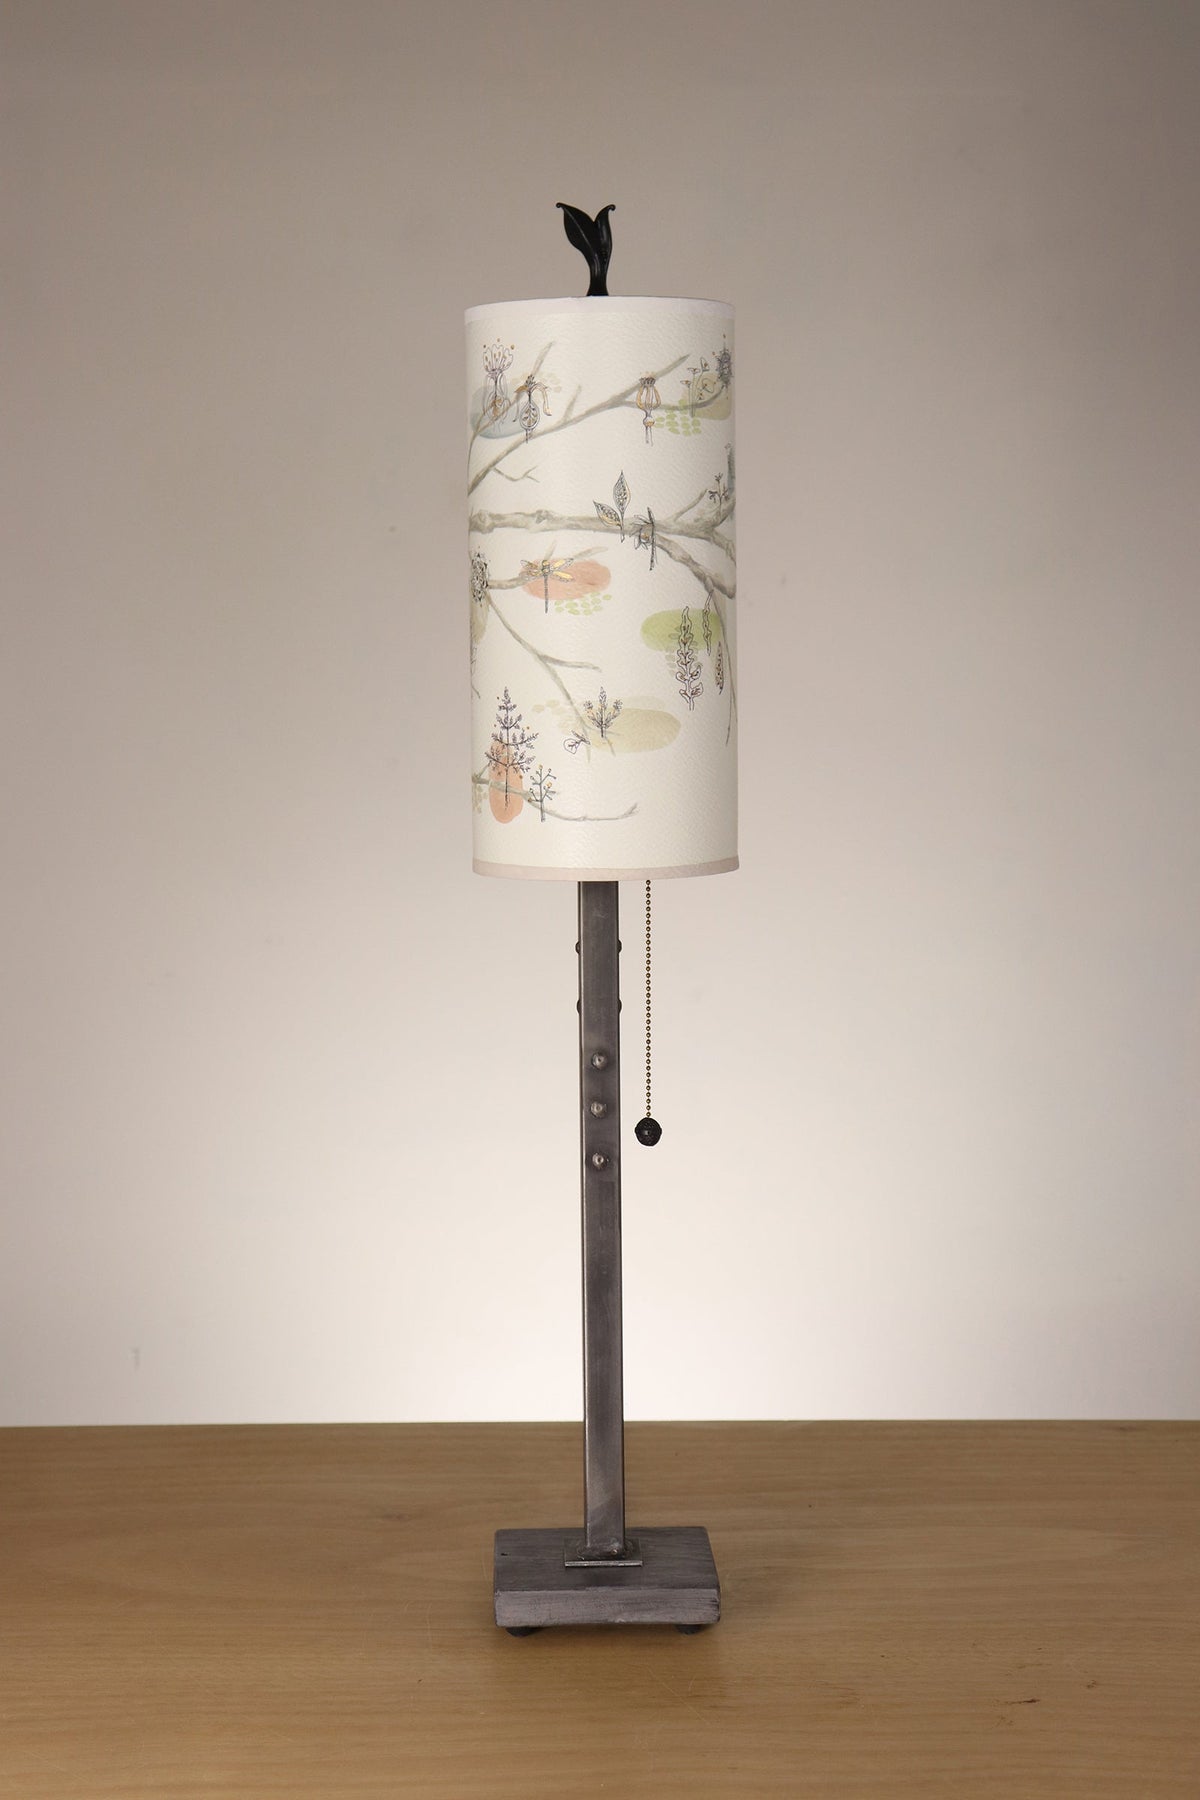 Limited Batch Steel Table Lamp with Small Tube Shade in Artful Branch